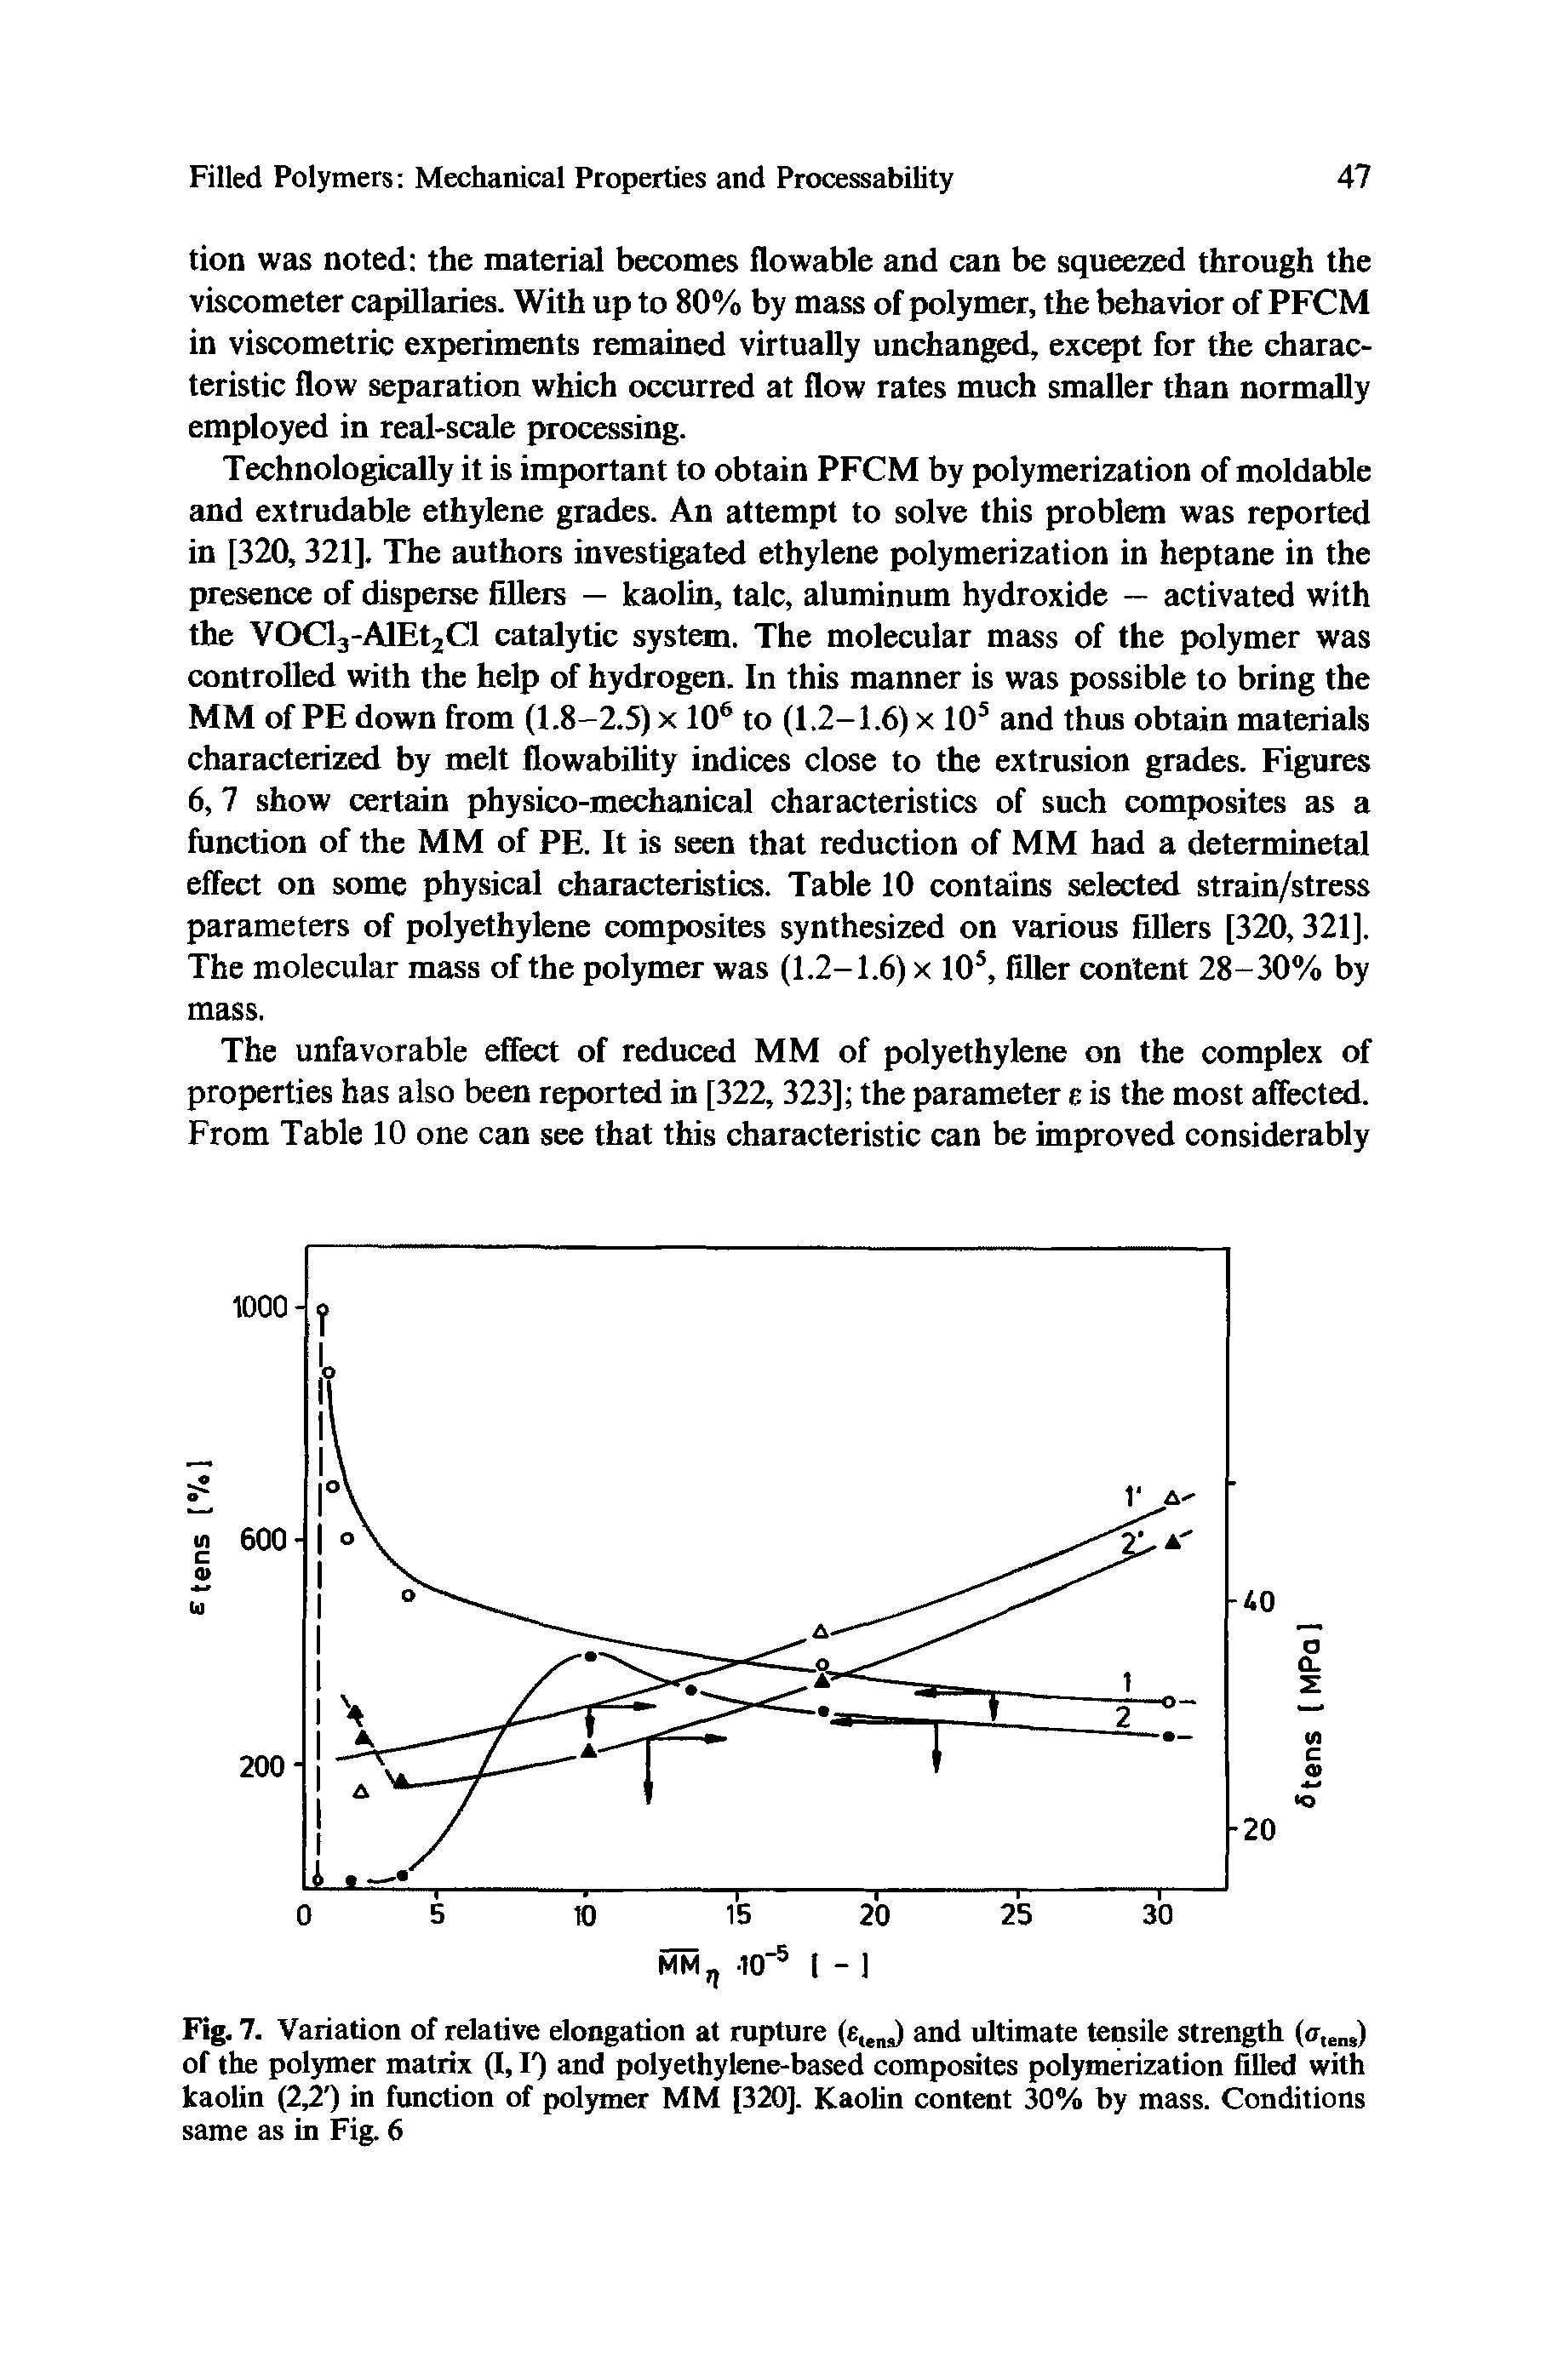 Fig. 7. Variation of relative elongation at rupture (elens) and ultimate tensile strength (fftens) of the polymer matrix (I, F) and polyethylene-based composites polymerization filled with kaolin (2,2 ) in function of polymer MM [320]. Kaolin content 30% by mass. Conditions same as in Fig. 6...